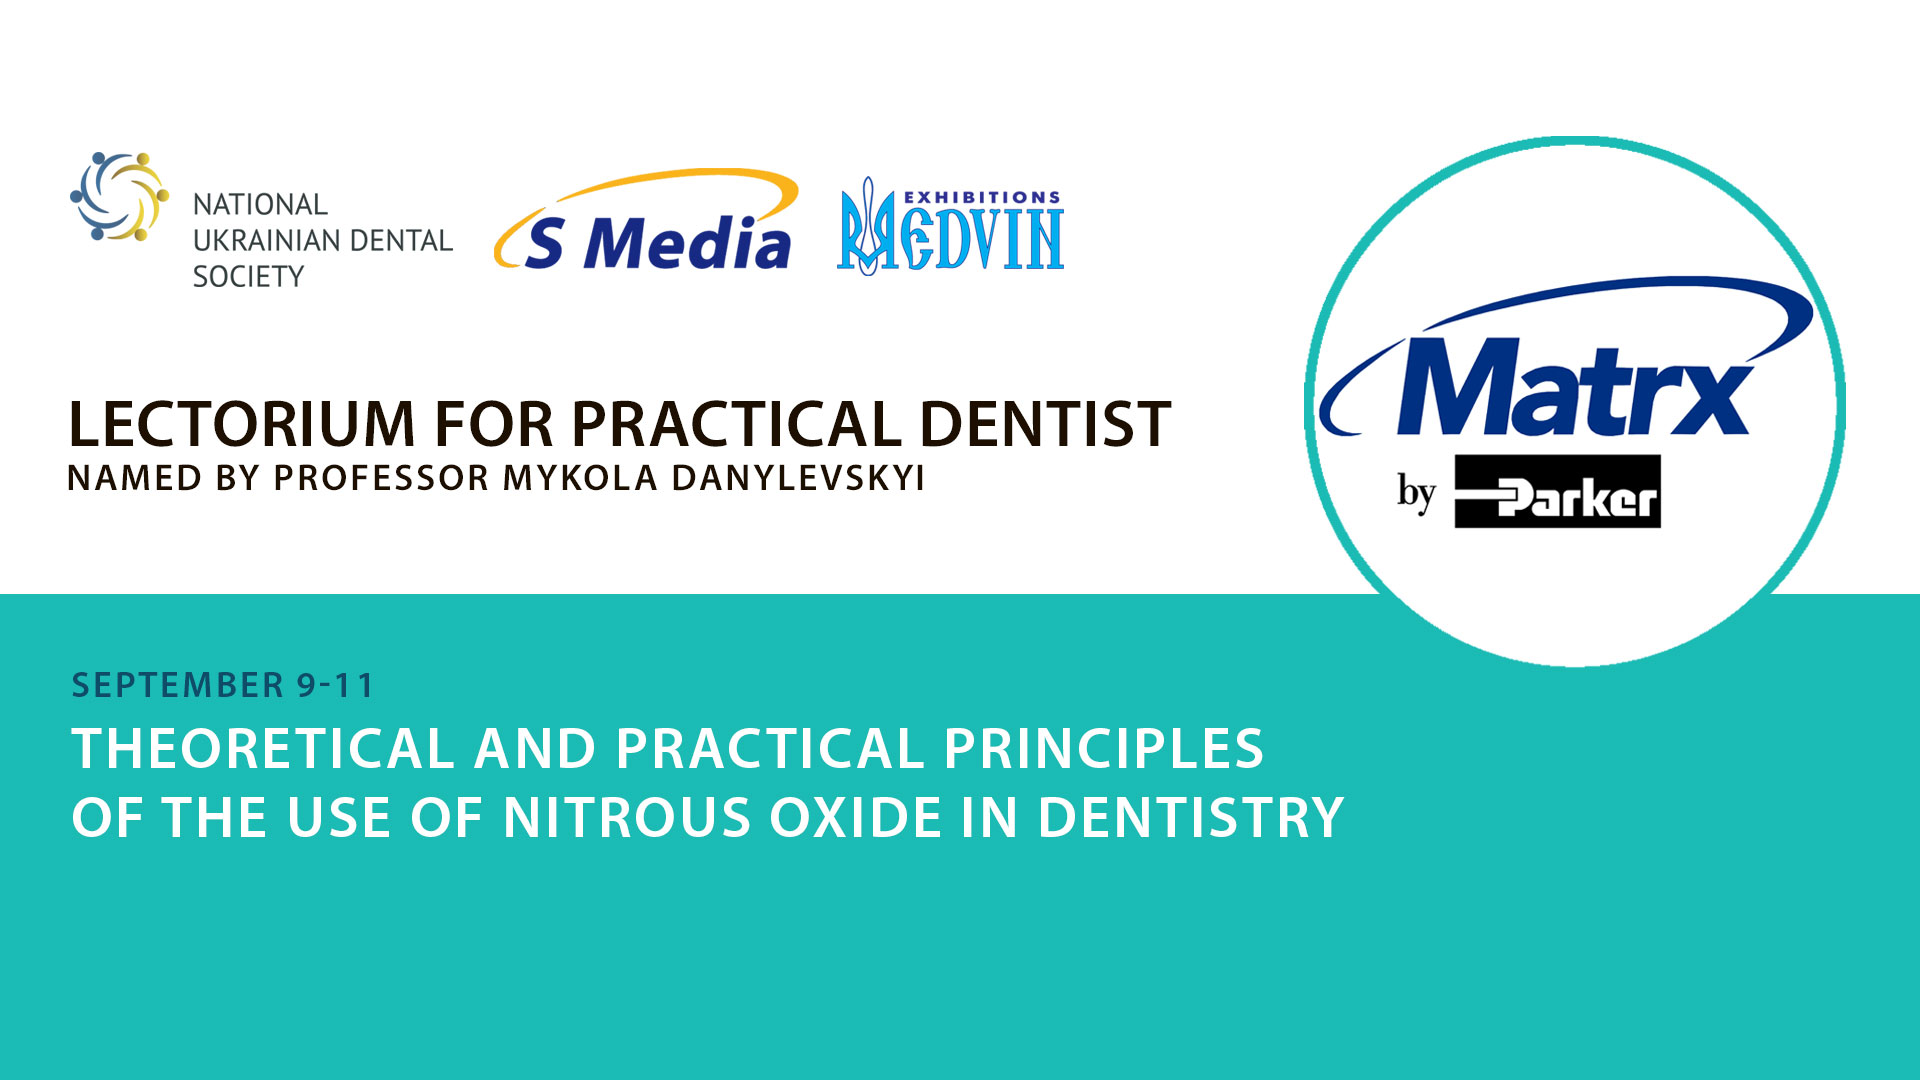 Theoretical and practical principles of the use of nitrous oxide in dentistry